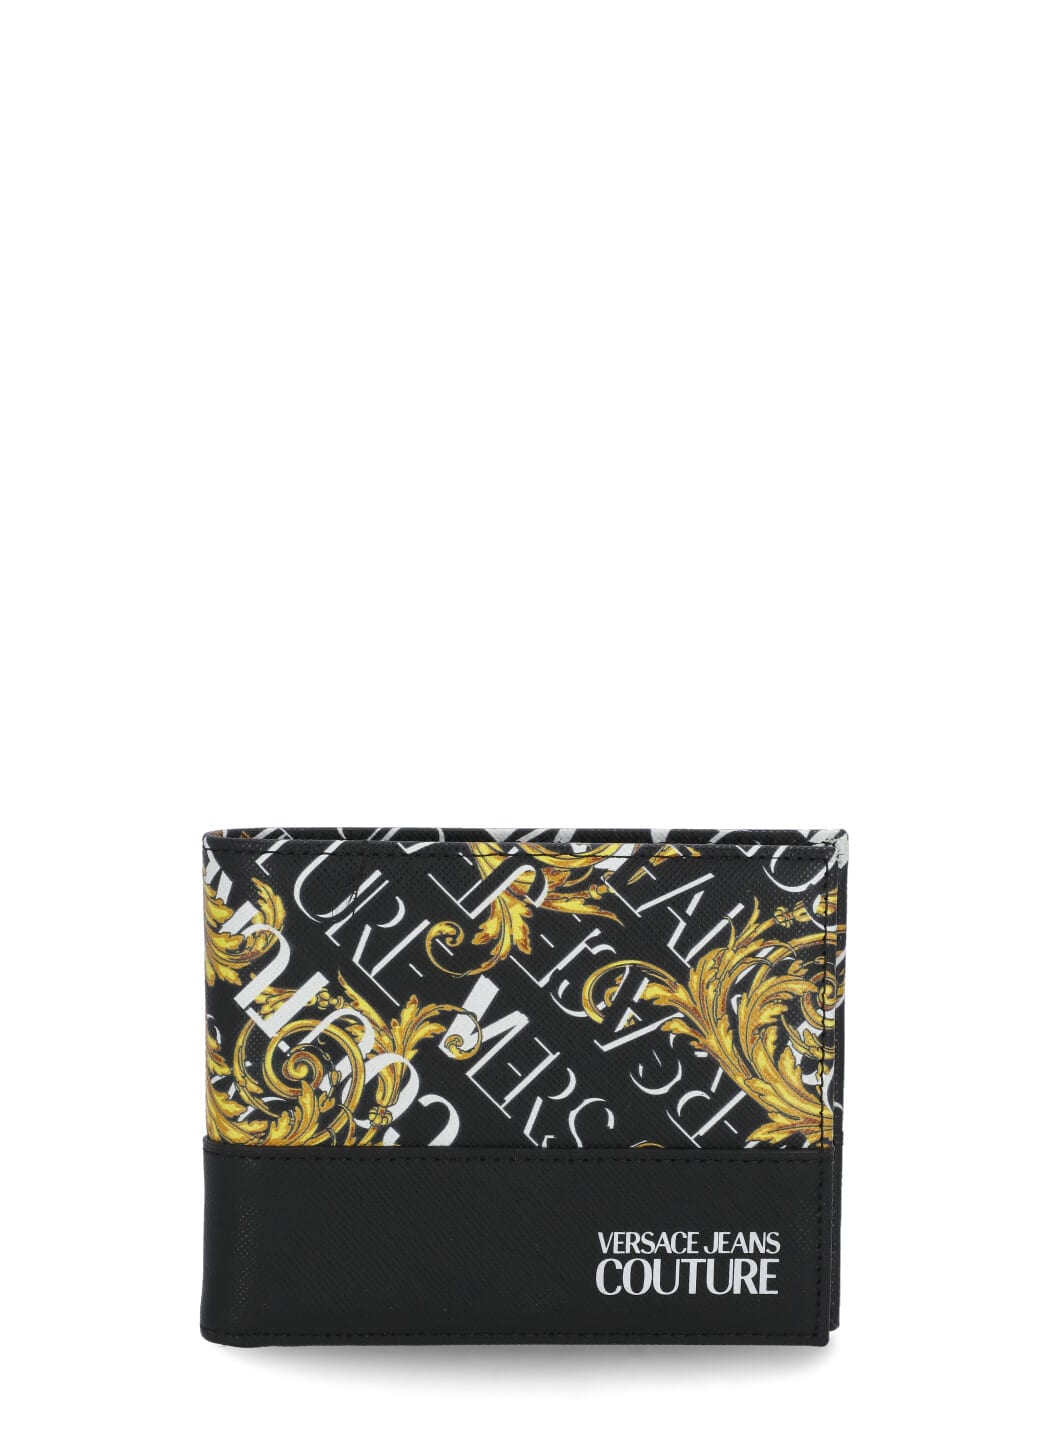 Versace Jeans Couture Brush Wallet